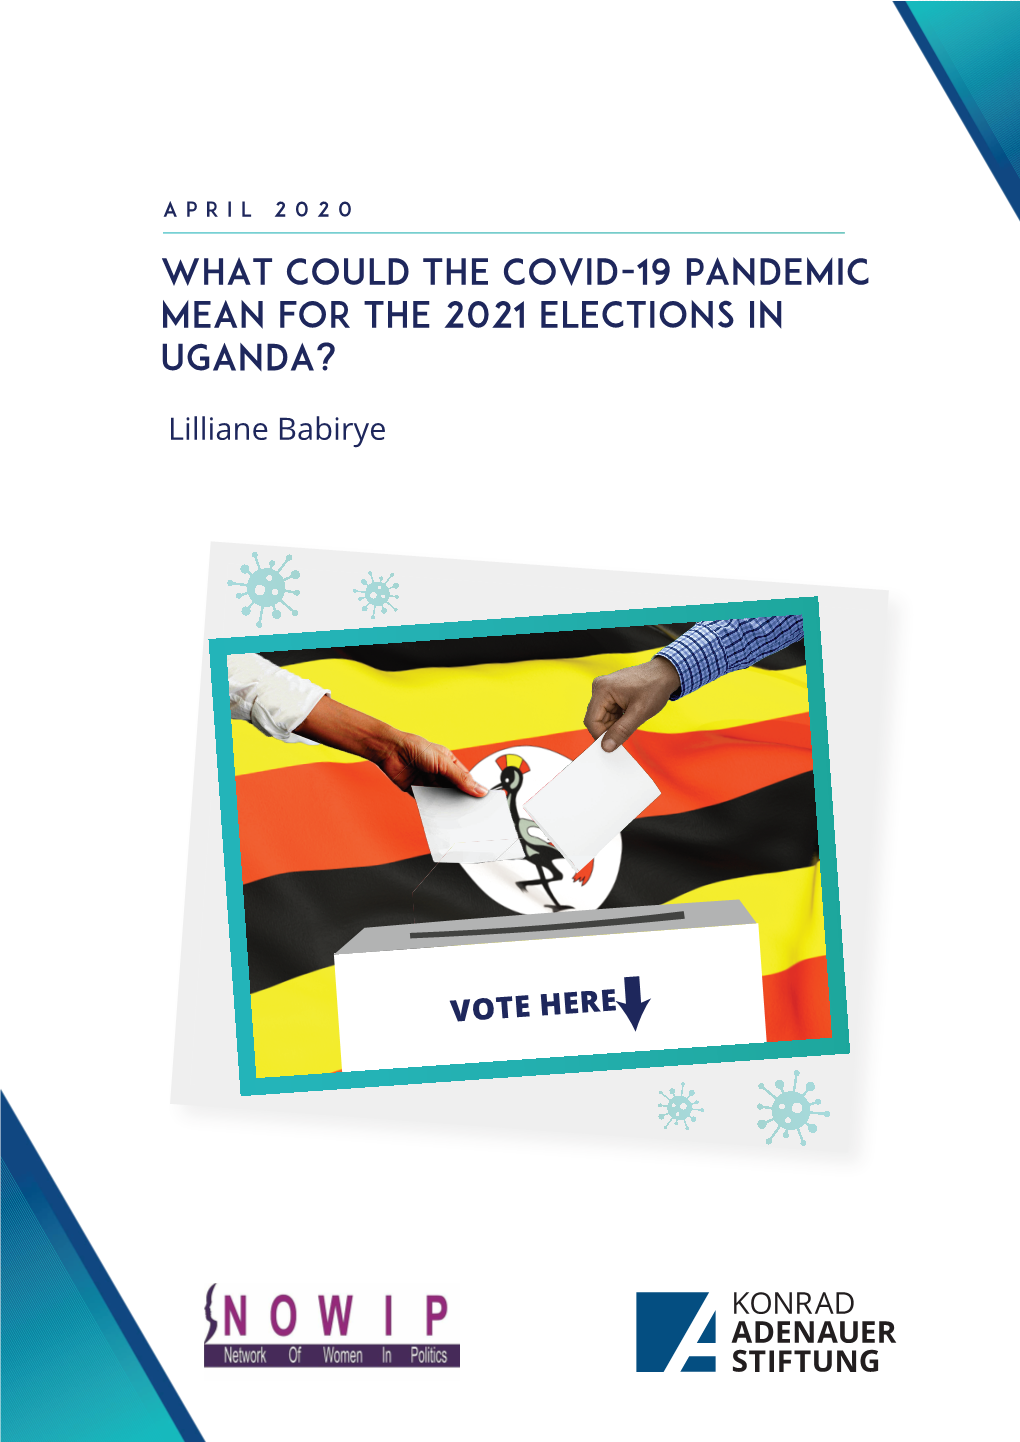 What Could the COVID-19 Pandemic Mean for the 2021 Elections in Uganda Copy